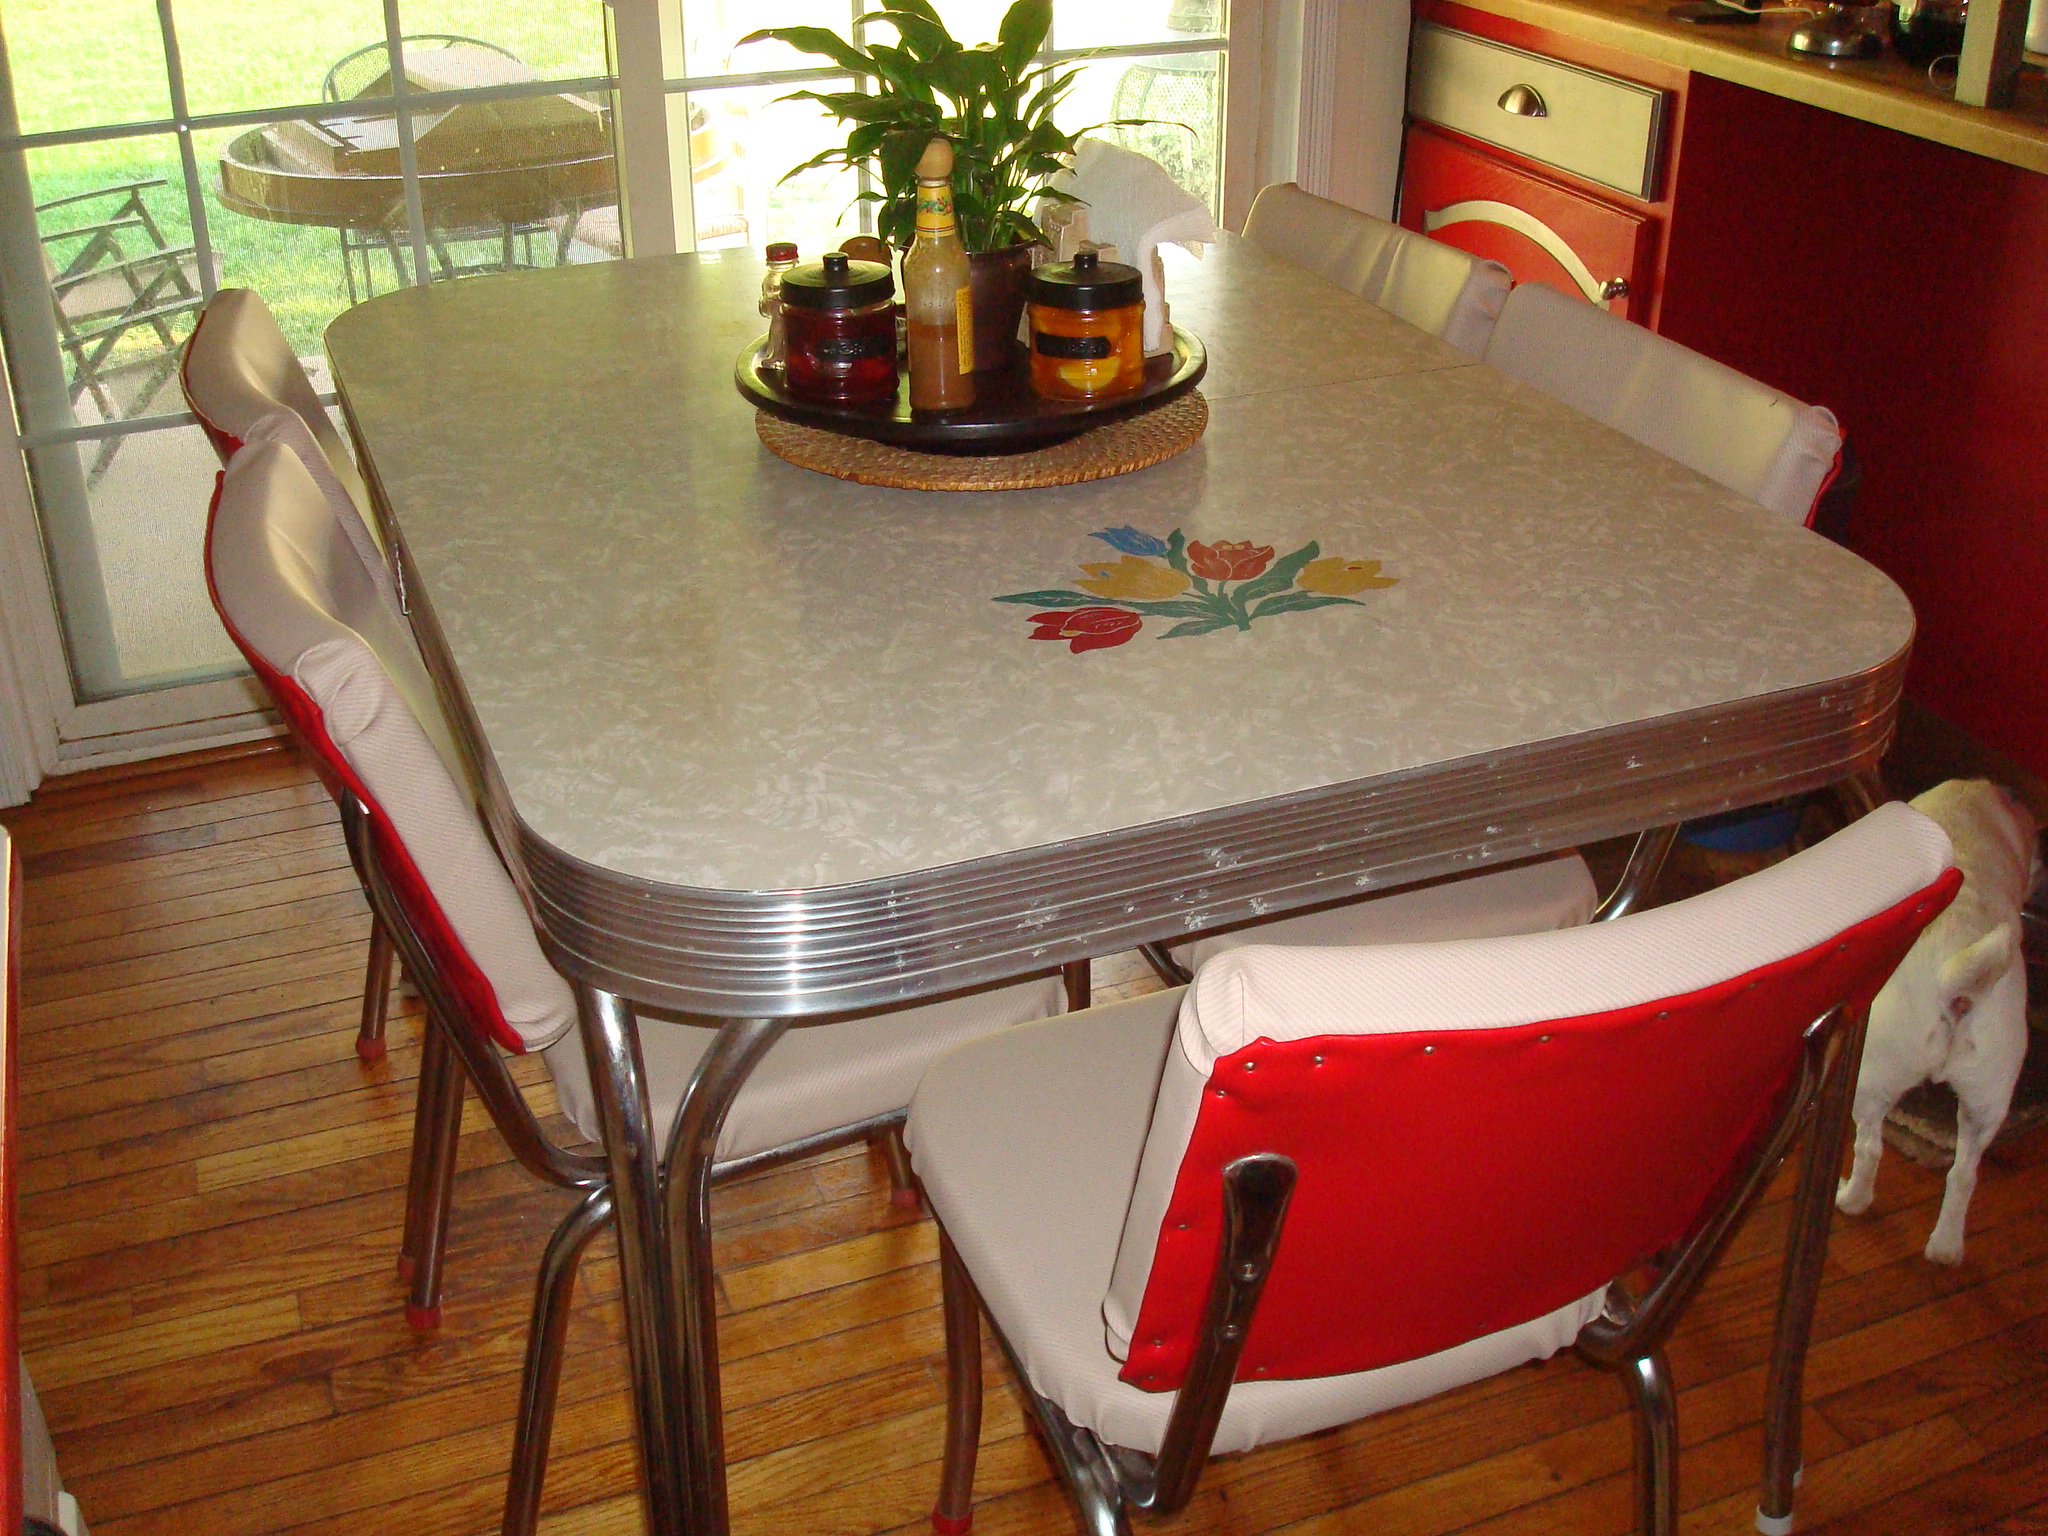 kitchen table from the 1950's